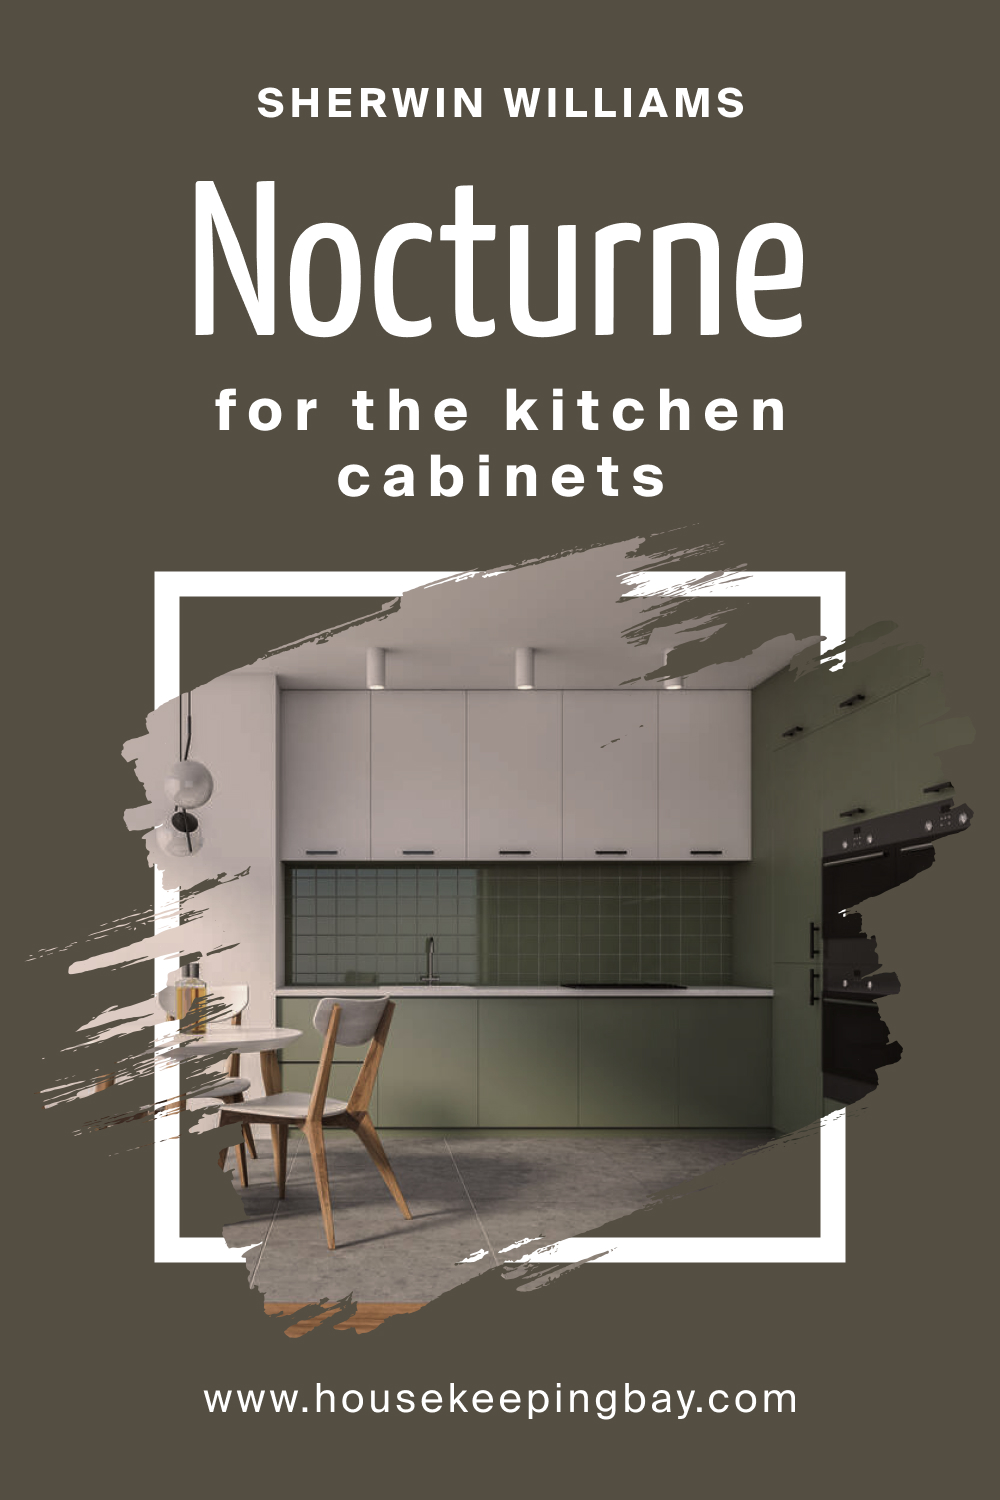 Sherwin Williams. SW 9520 Nocturne For the Kitchen Cabinets